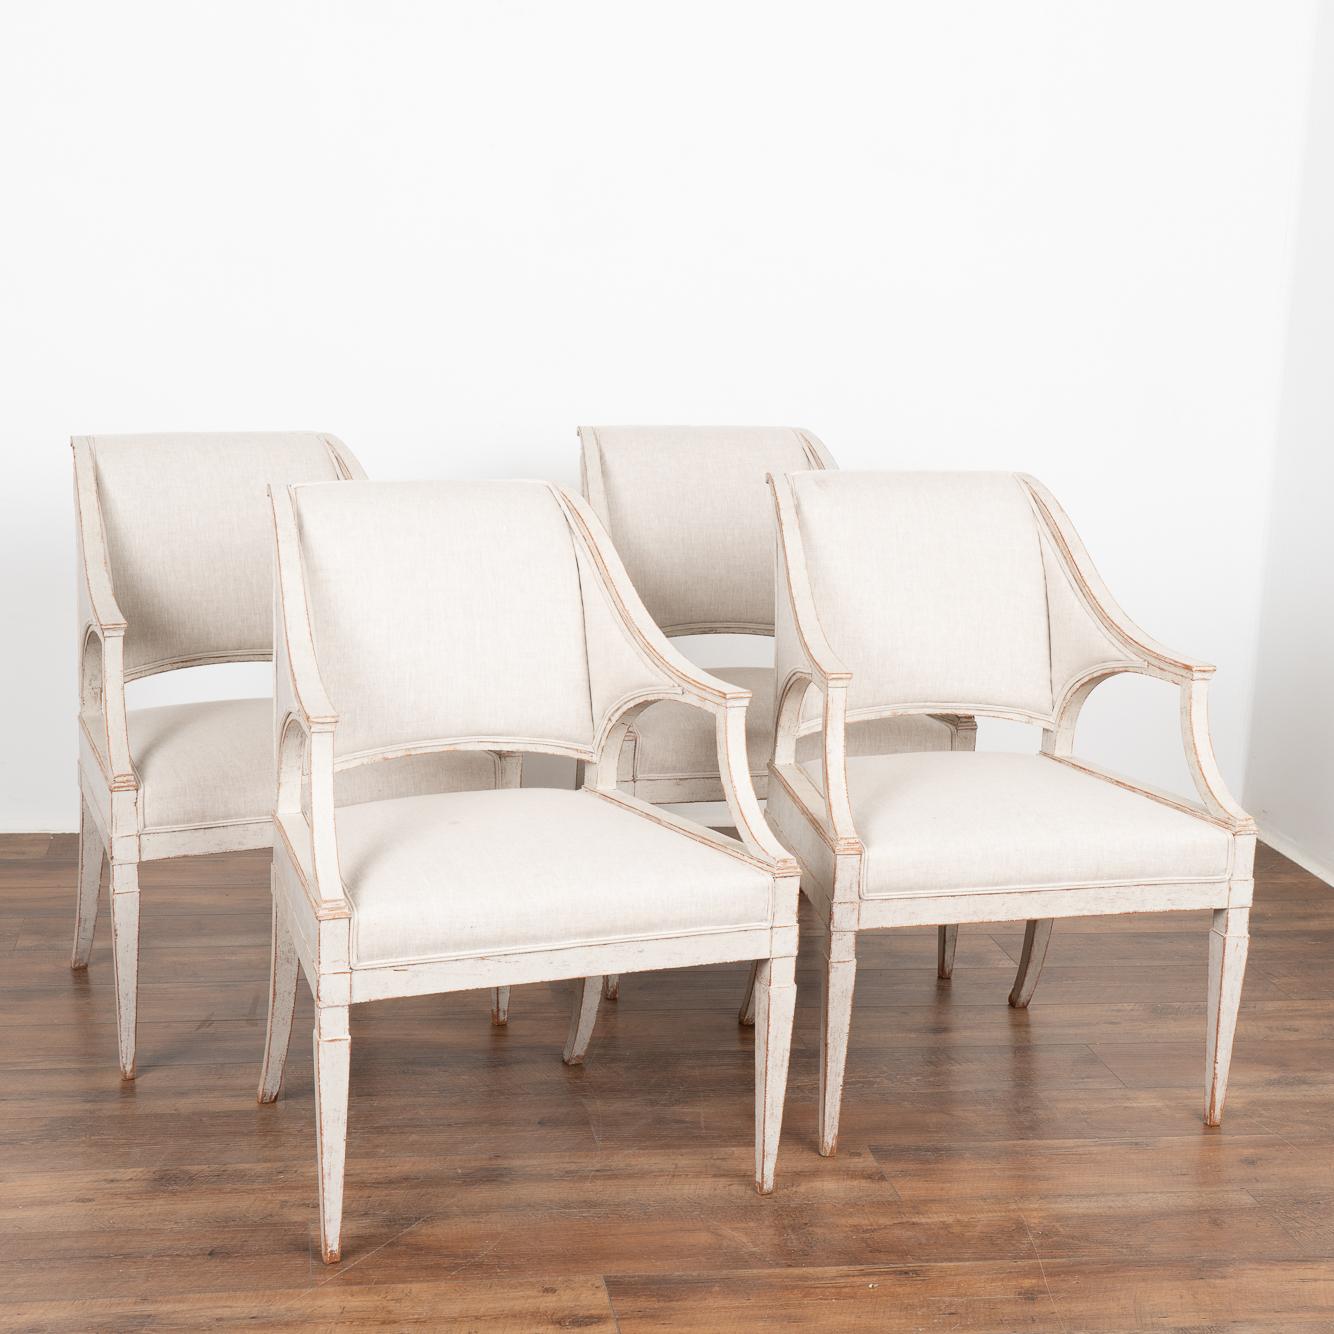 Set of Four Swedish Gustavian White Painted Arm Chairs, circa 1820-40 In Good Condition In Round Top, TX